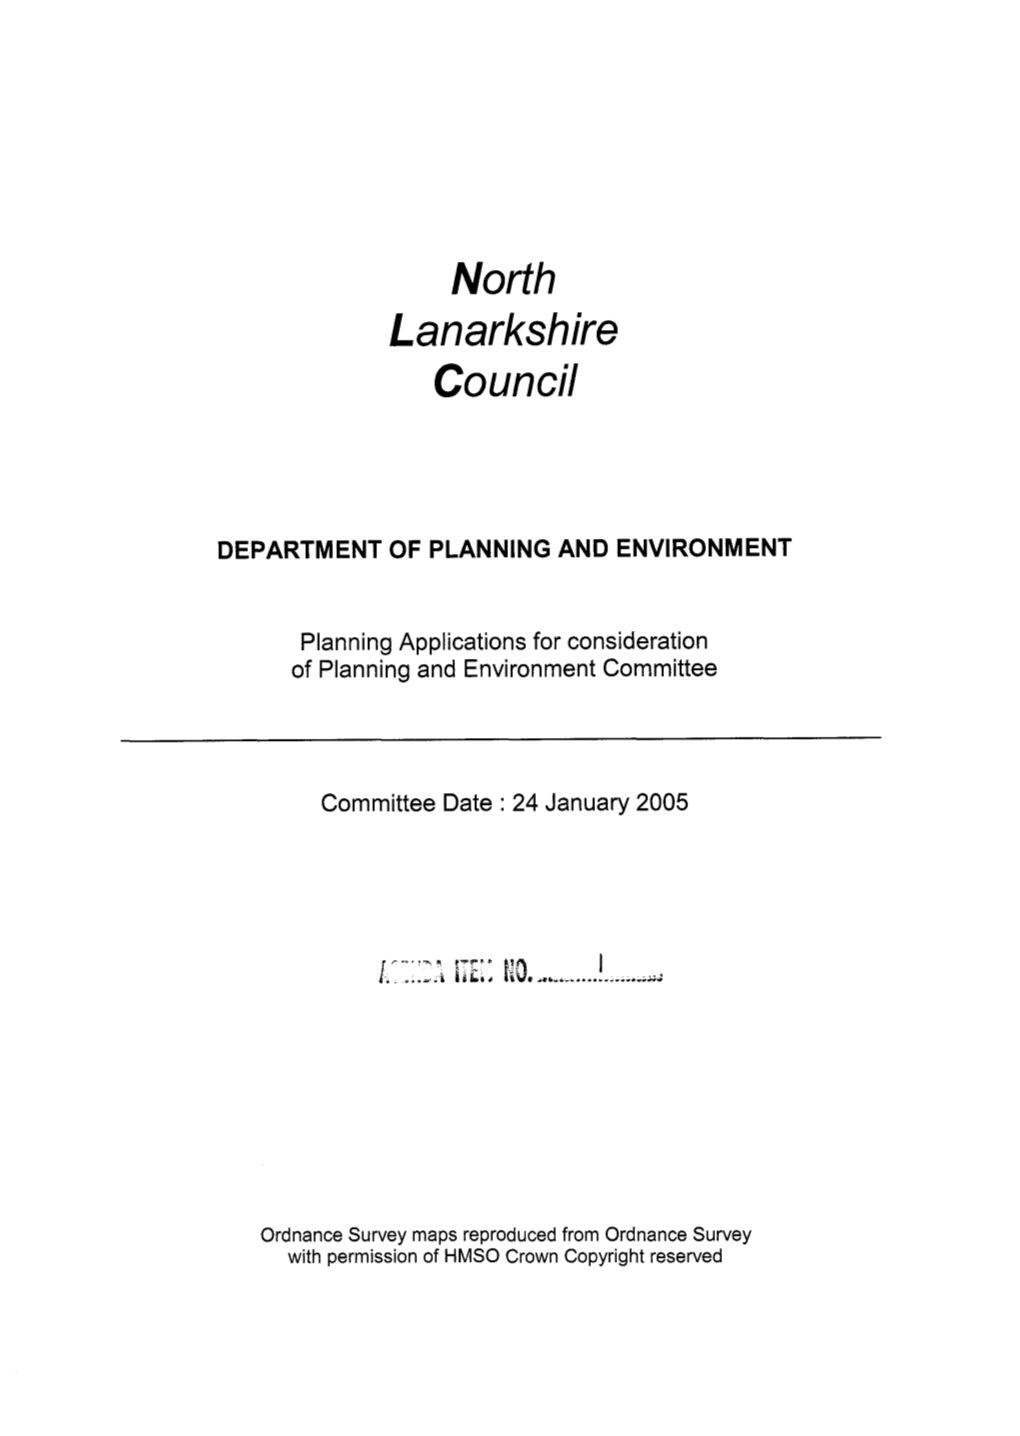 North Lanarkshire Council DEPARTMENT of PLANNING